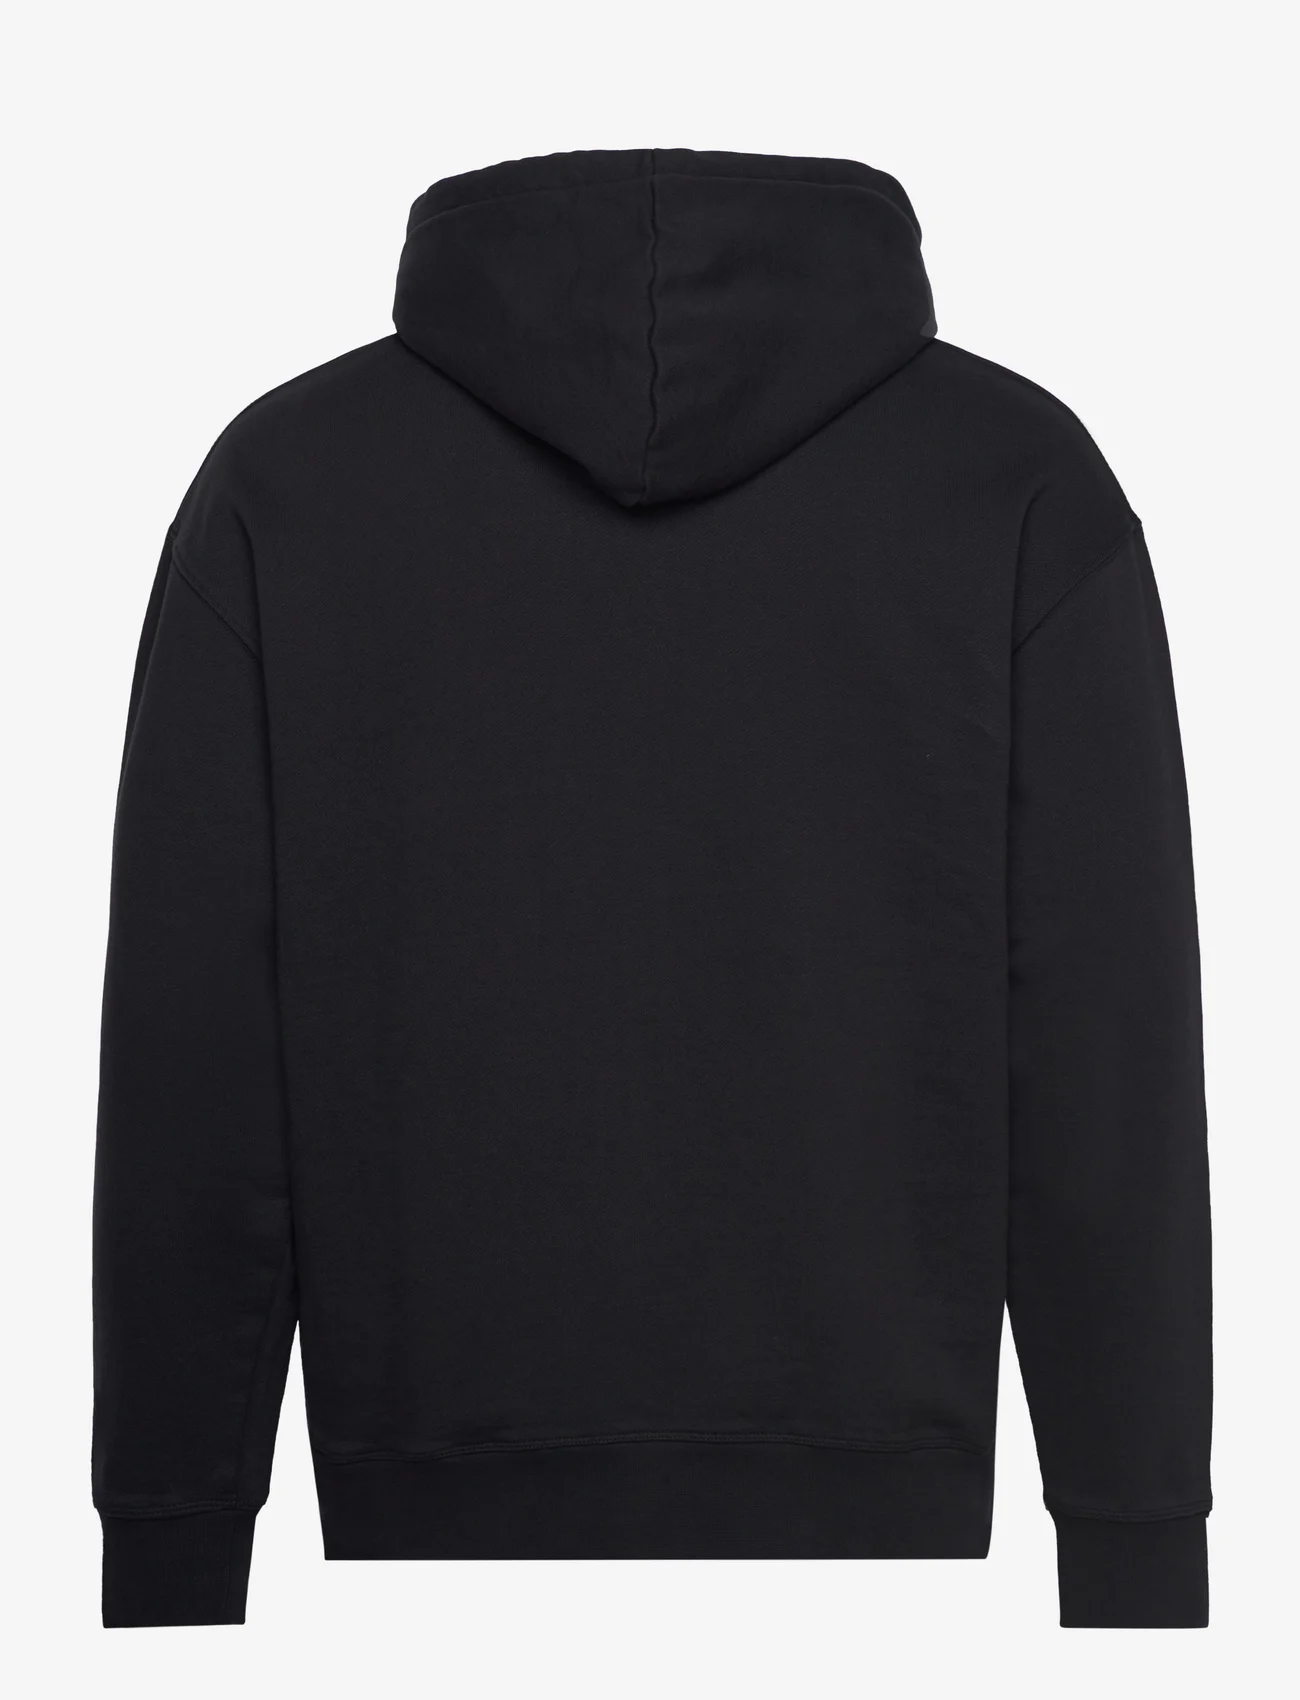 Replay - Jumper RELAXED PURE LOGO - hoodies - black - 1